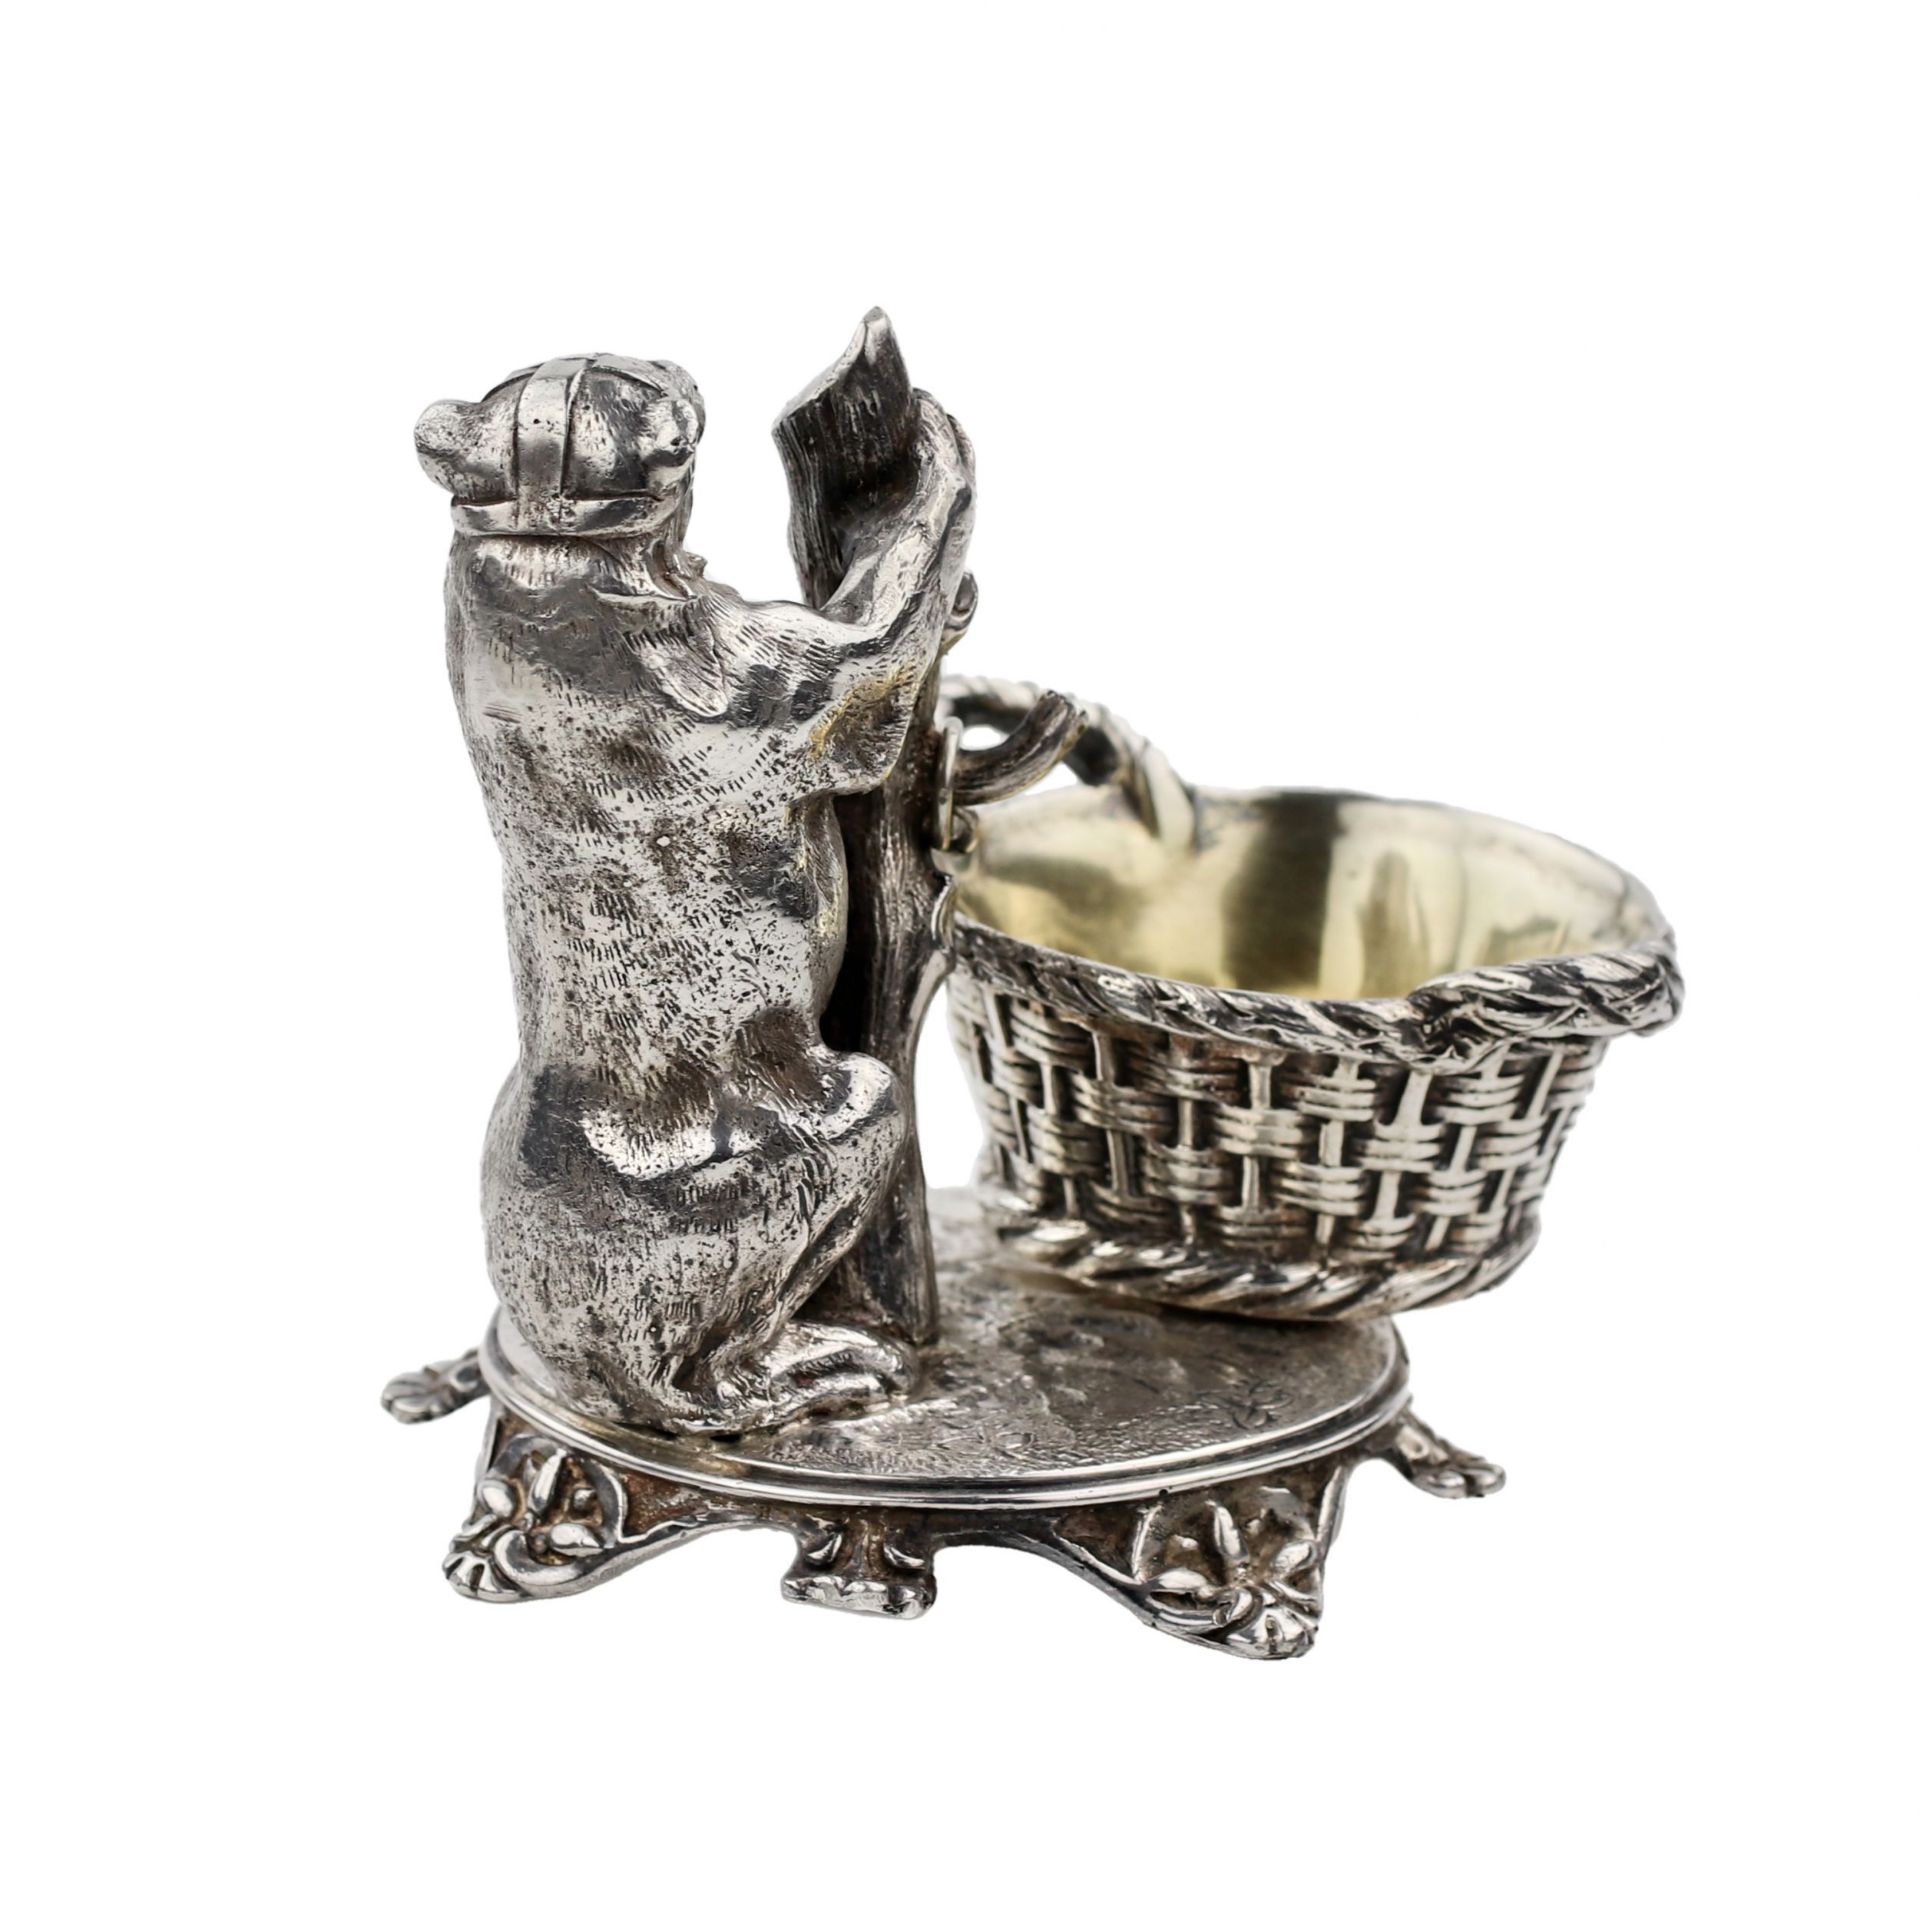 Witty, silver salt shaker with a bear, workshop Grachev.1889 - Image 4 of 8